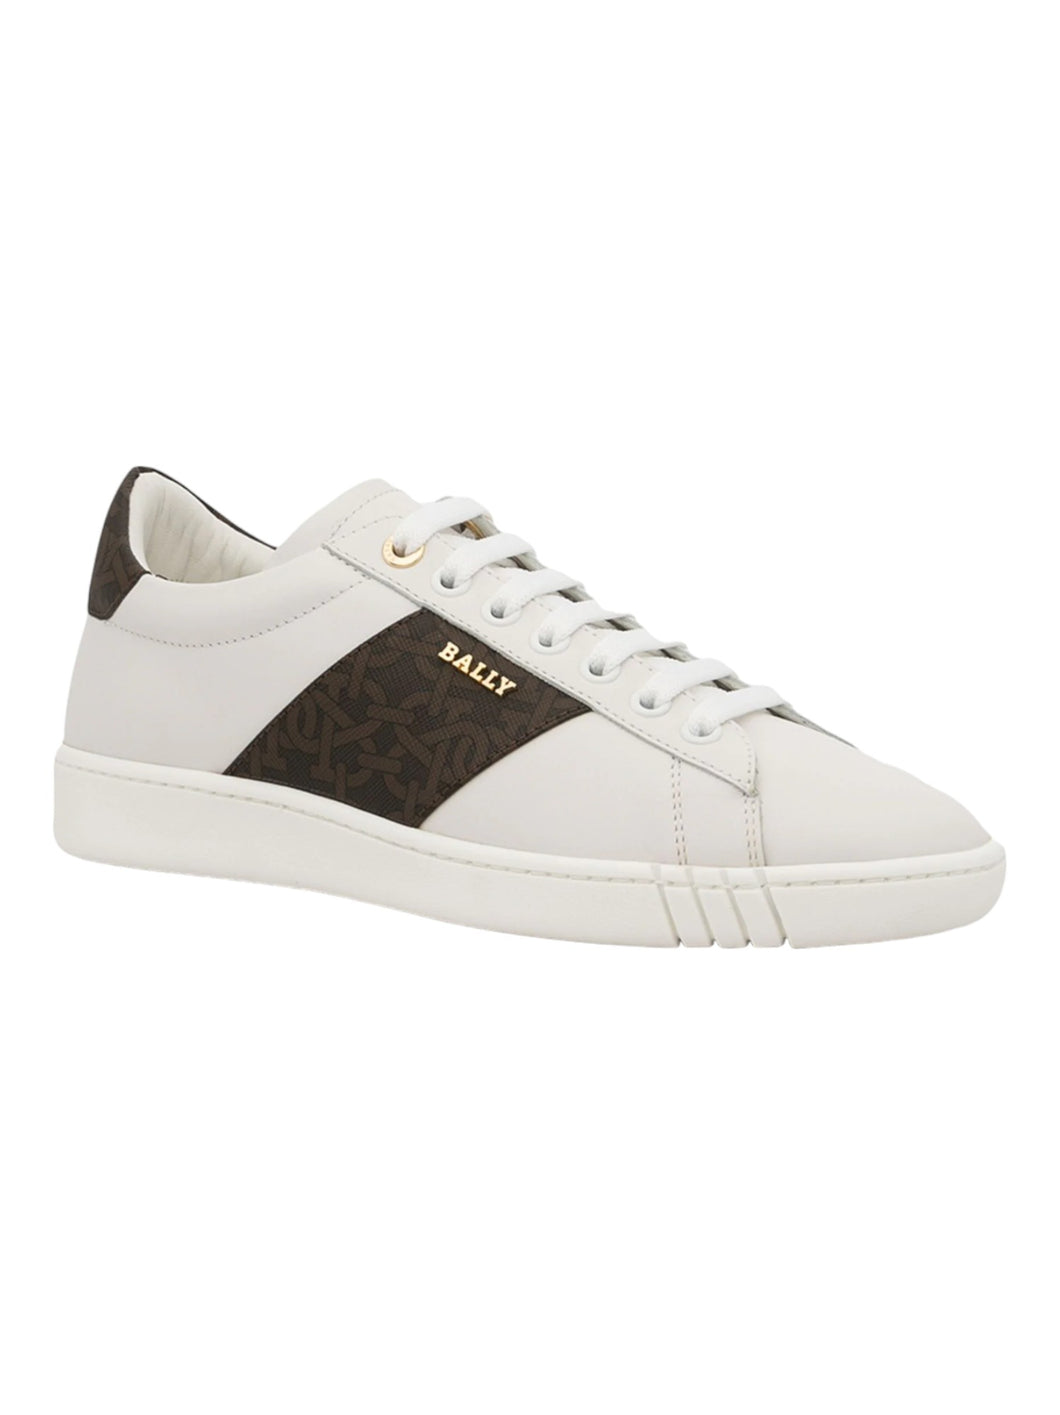 Bally Wilelm Men's 6239922 White Leather Sneakers MSRP $620